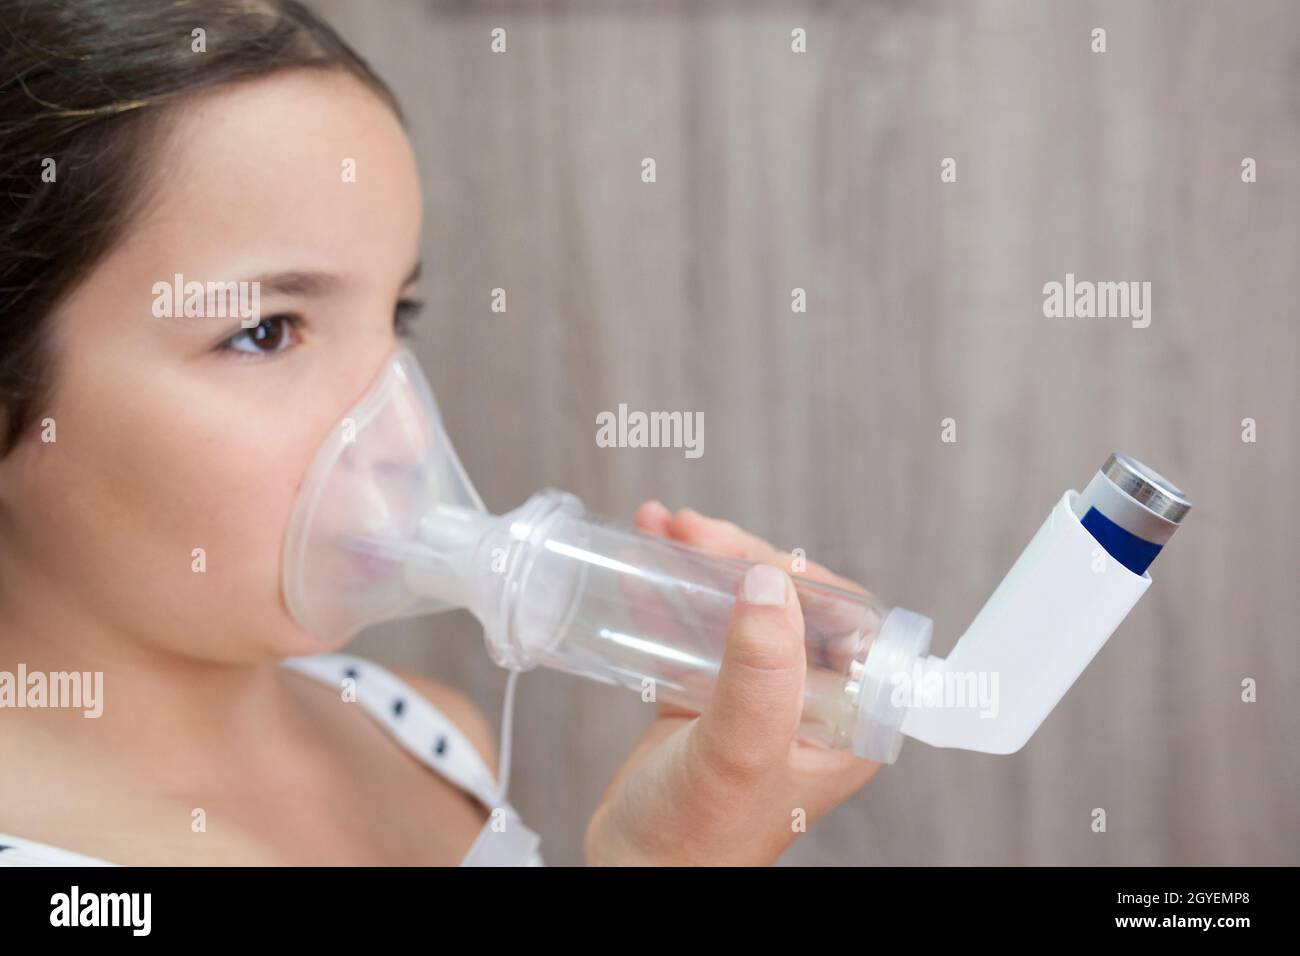 Child girl using medical spray for breath. Inhaler, spacer and mask. Side view Stock Photo